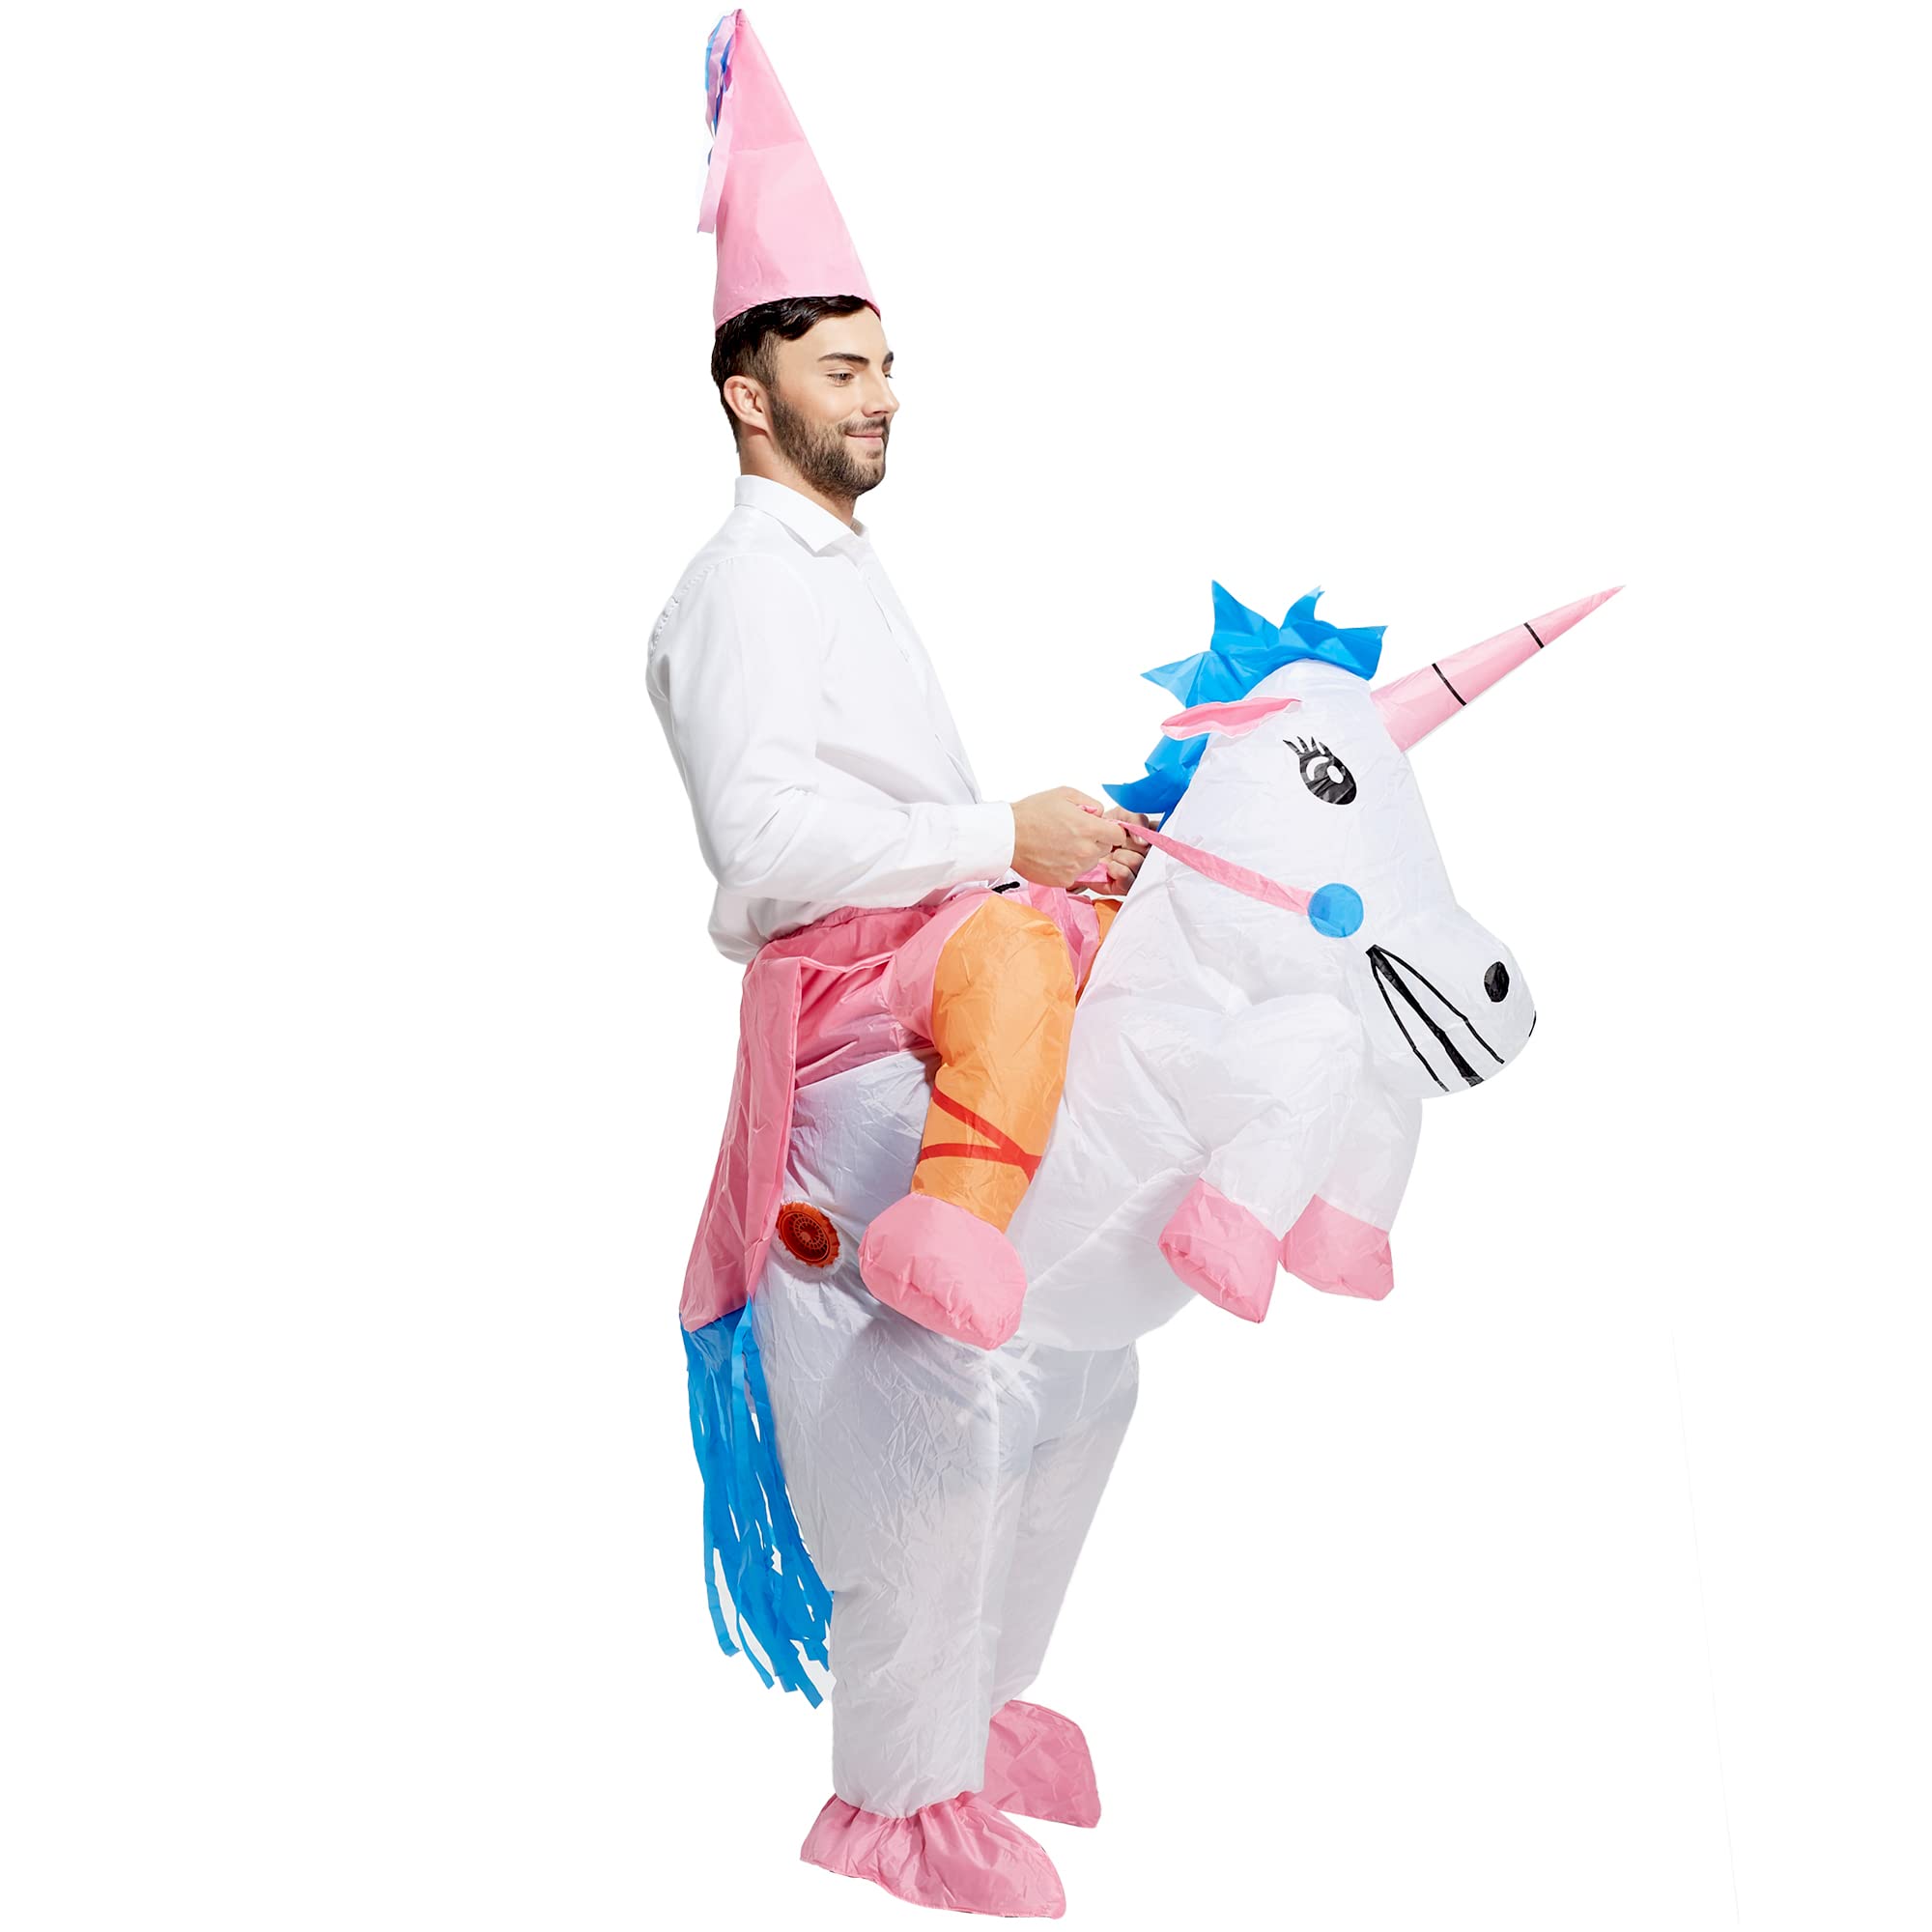 TOLOCO Inflatable Costume for Adults, Blow up Costume, Men Halloween Costume, Inflatable Unicorn Costume for Adult